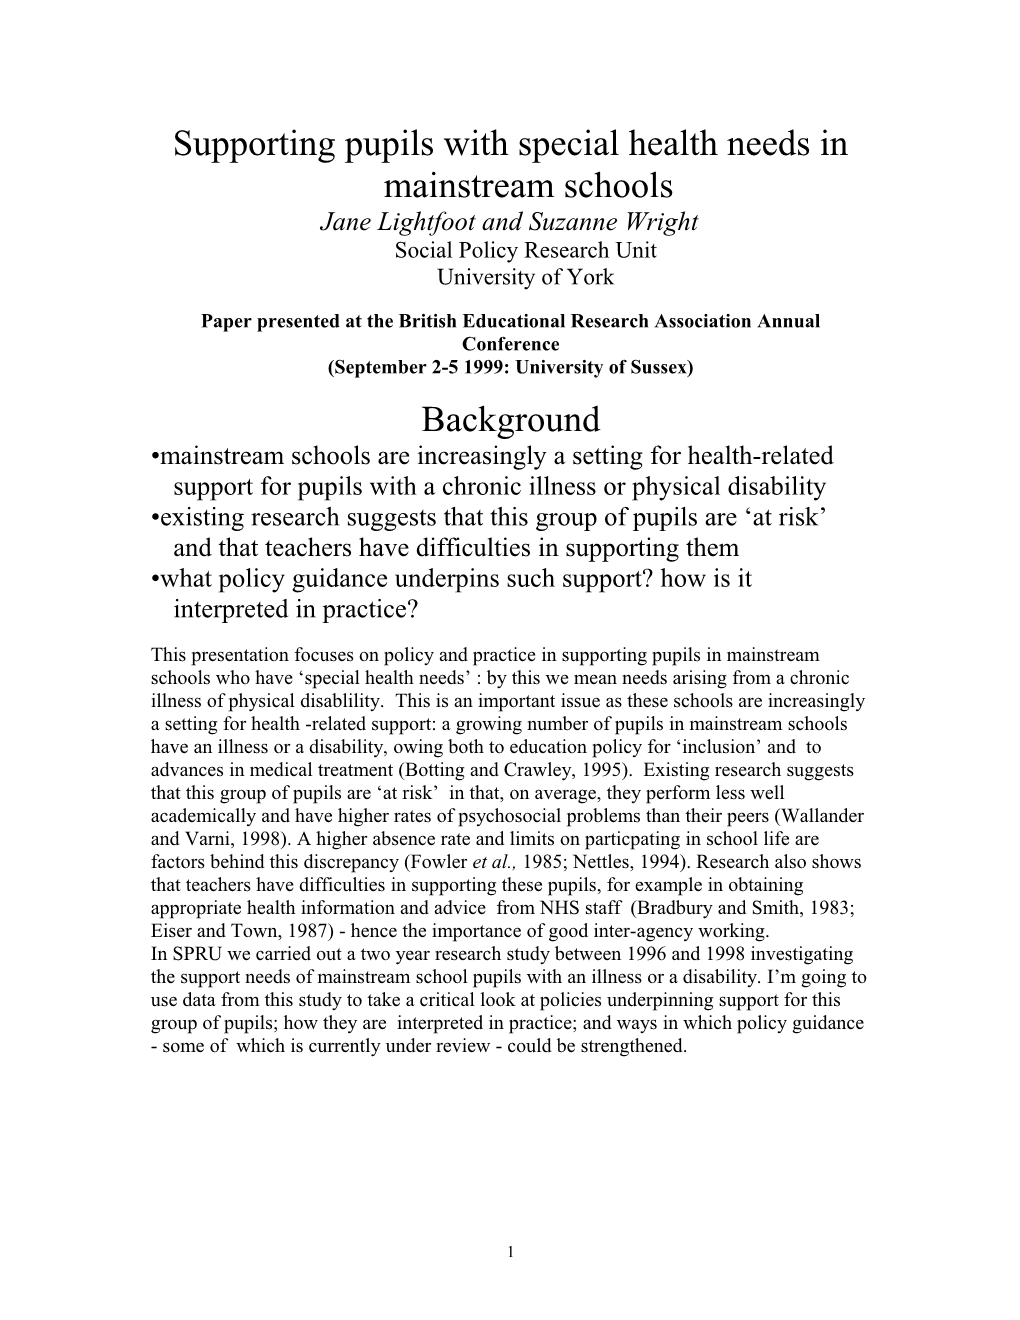 Supporting Pupils with Special Health Needs in Mainstream Schools